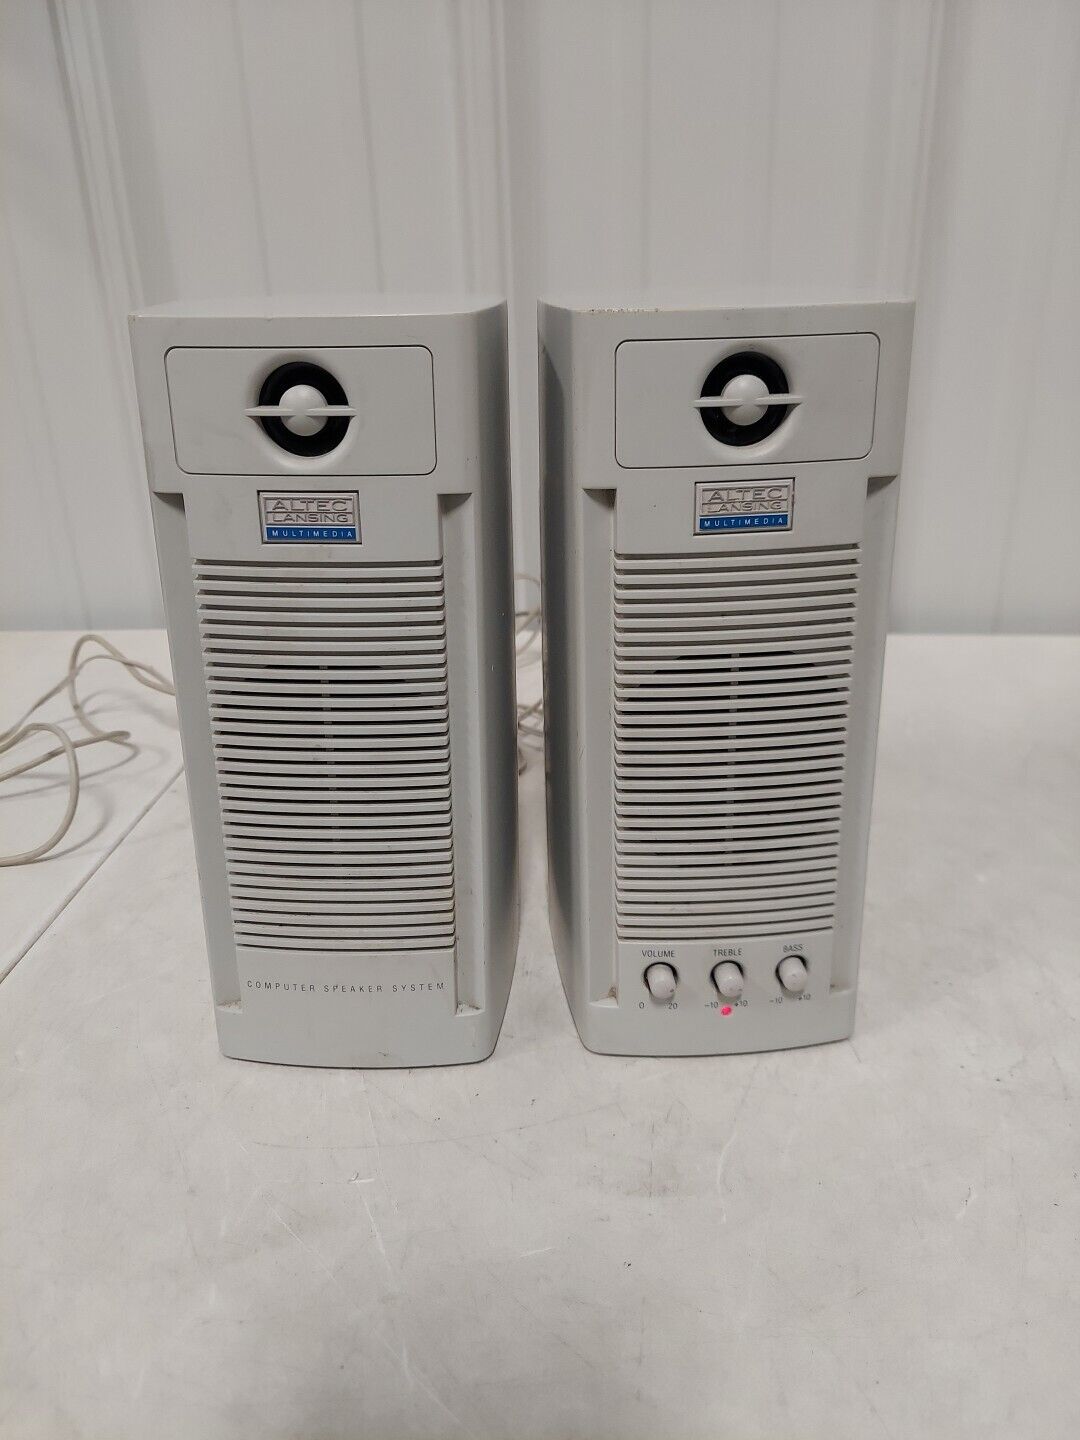 Altec Lansing ACS40 Multimedia Computer Speakers w/Power Supply TESTED #1865